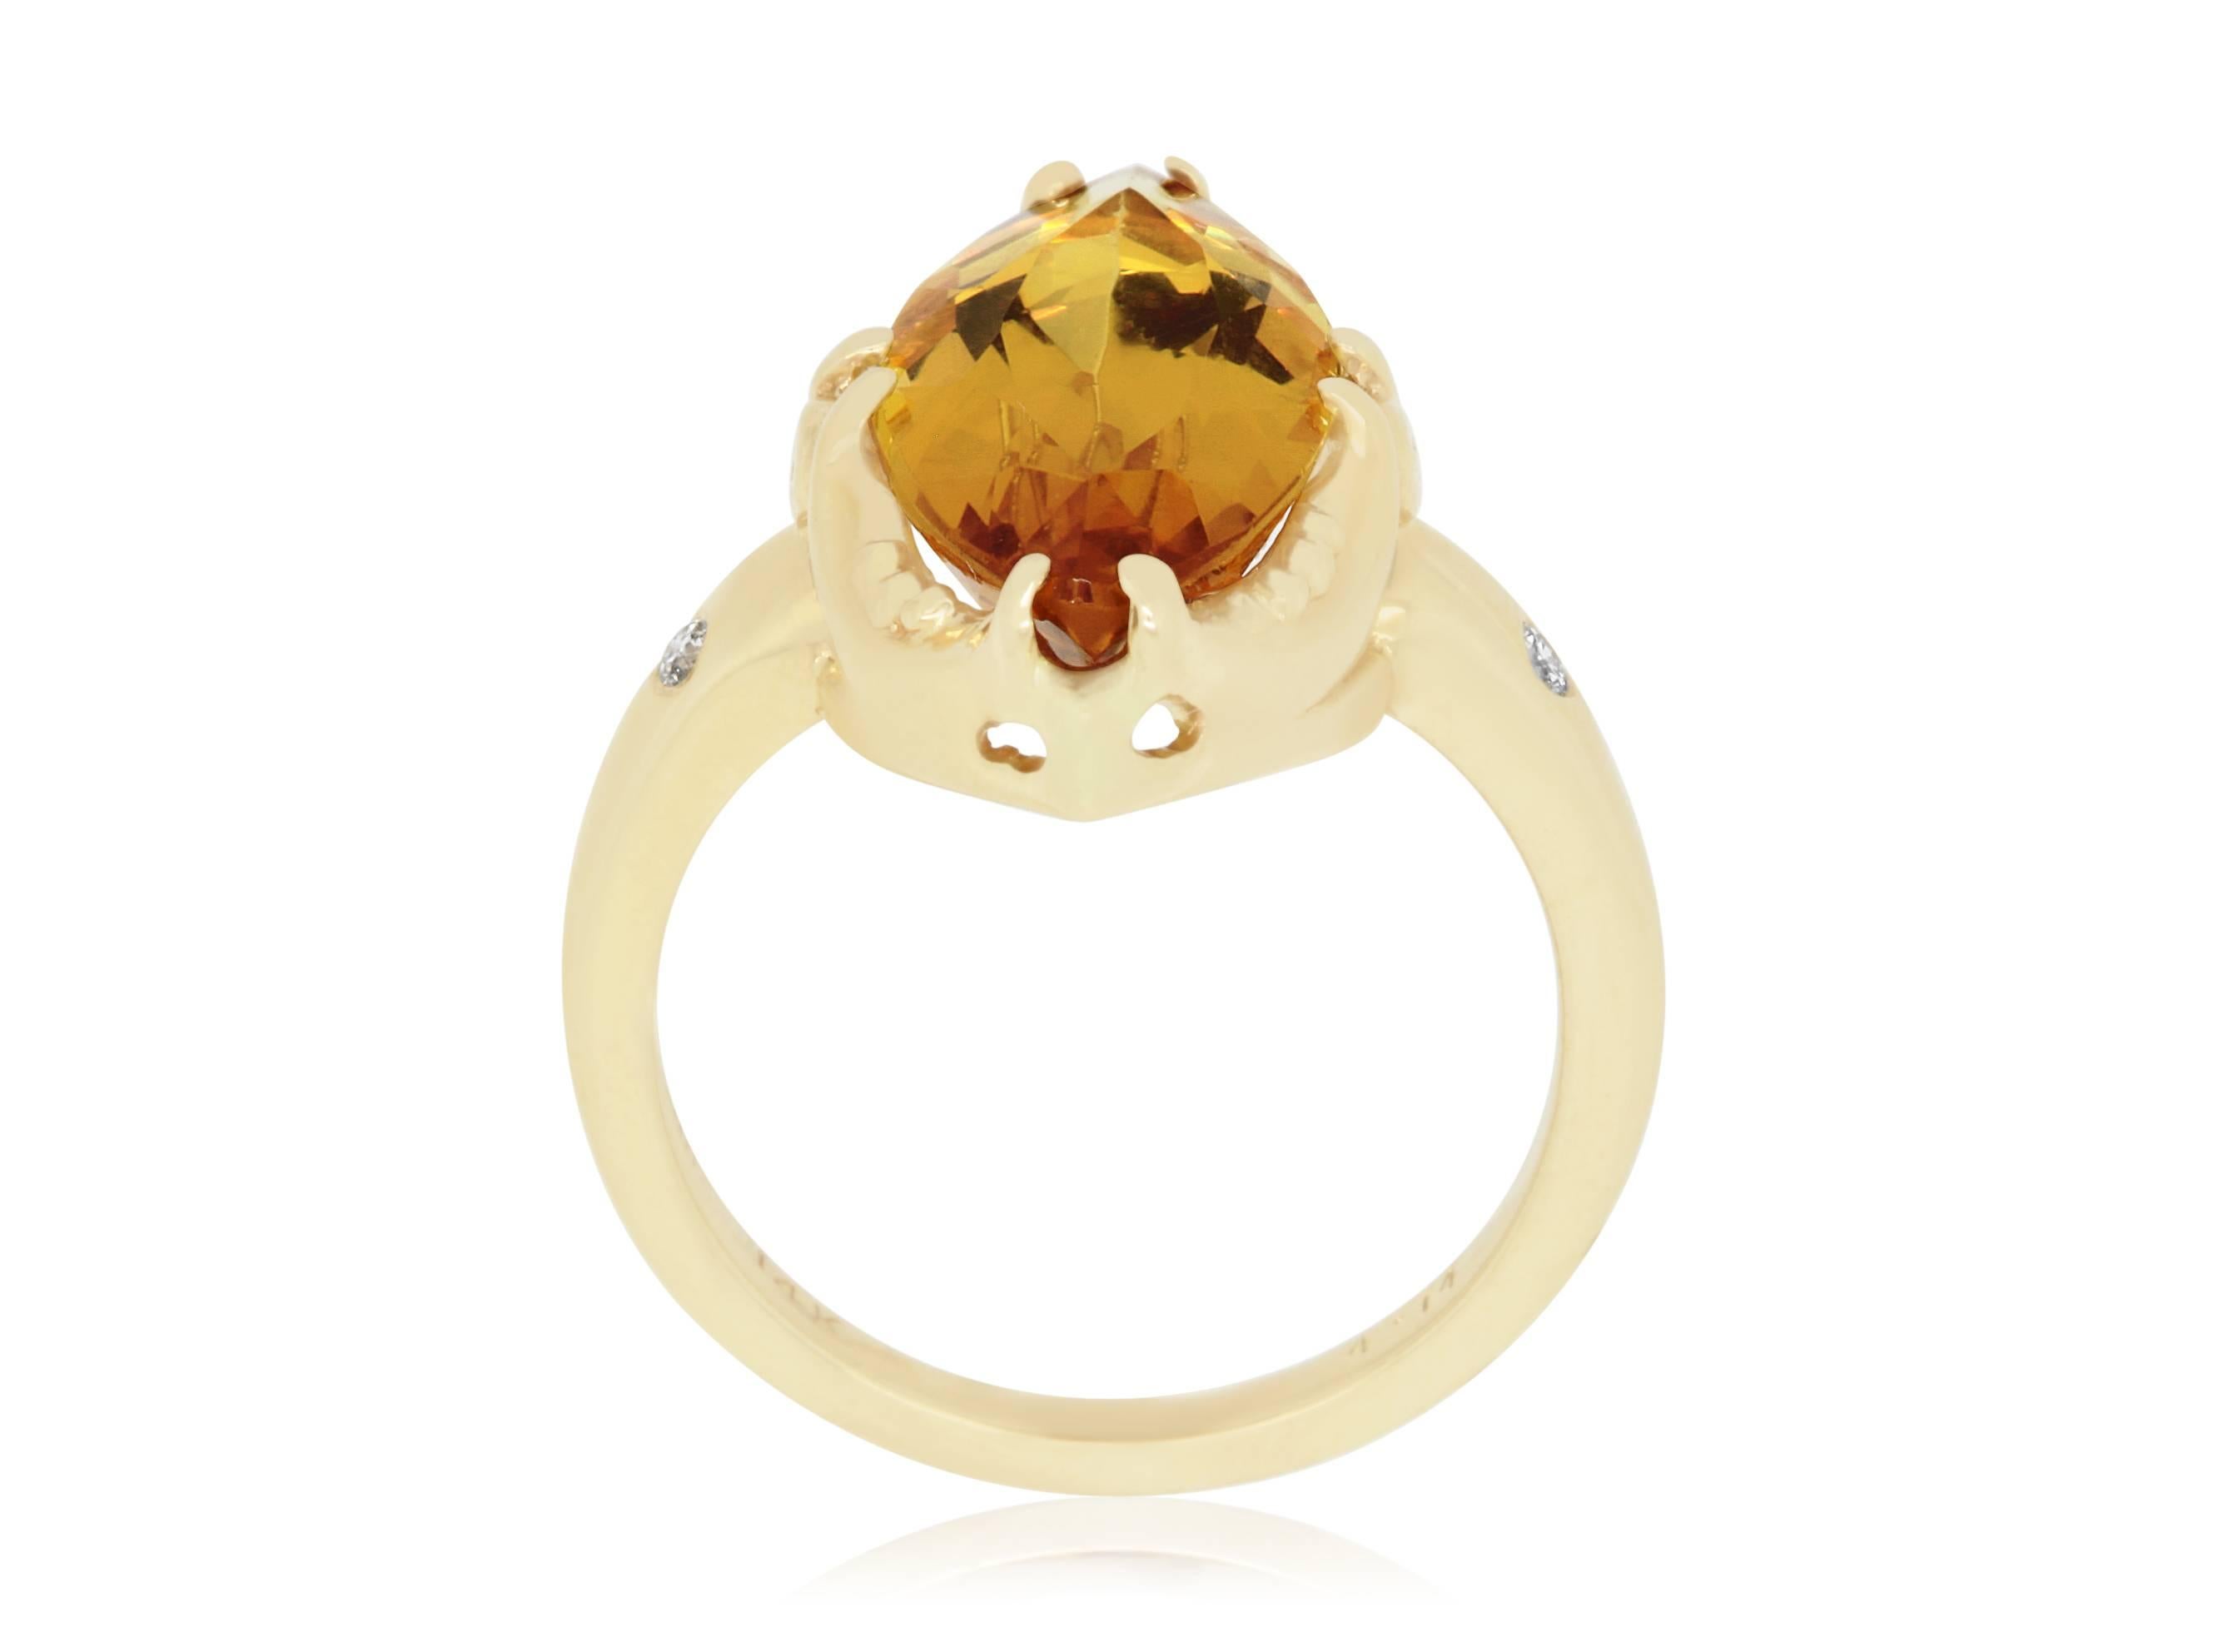 Beautiful, bold, gold! Yellow Beryl Cocktail Ring

Material: 14k Yellow Gold 
Center Stone Details: 1 Marquise Shaped Yellow Beryl at 4.74 Carats
Mounting Stone Details: 2 Brilliant Round Diamonds at 0.02 Carats - Clarity: SI / Color:  H-I
Ring